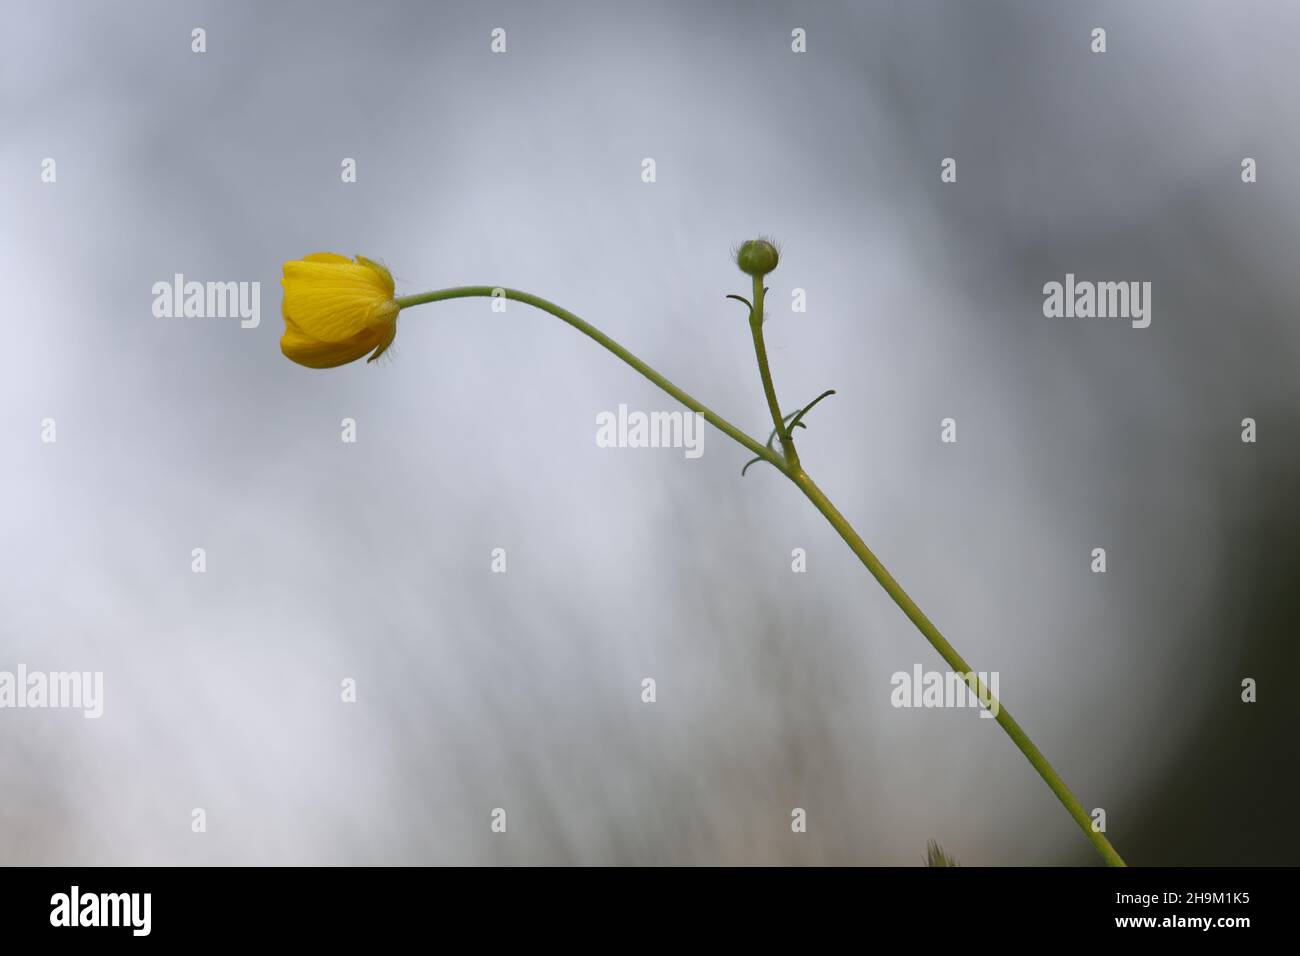 Ranunculus psilostachys. Buttercup close up with blurred background. Stock Photo